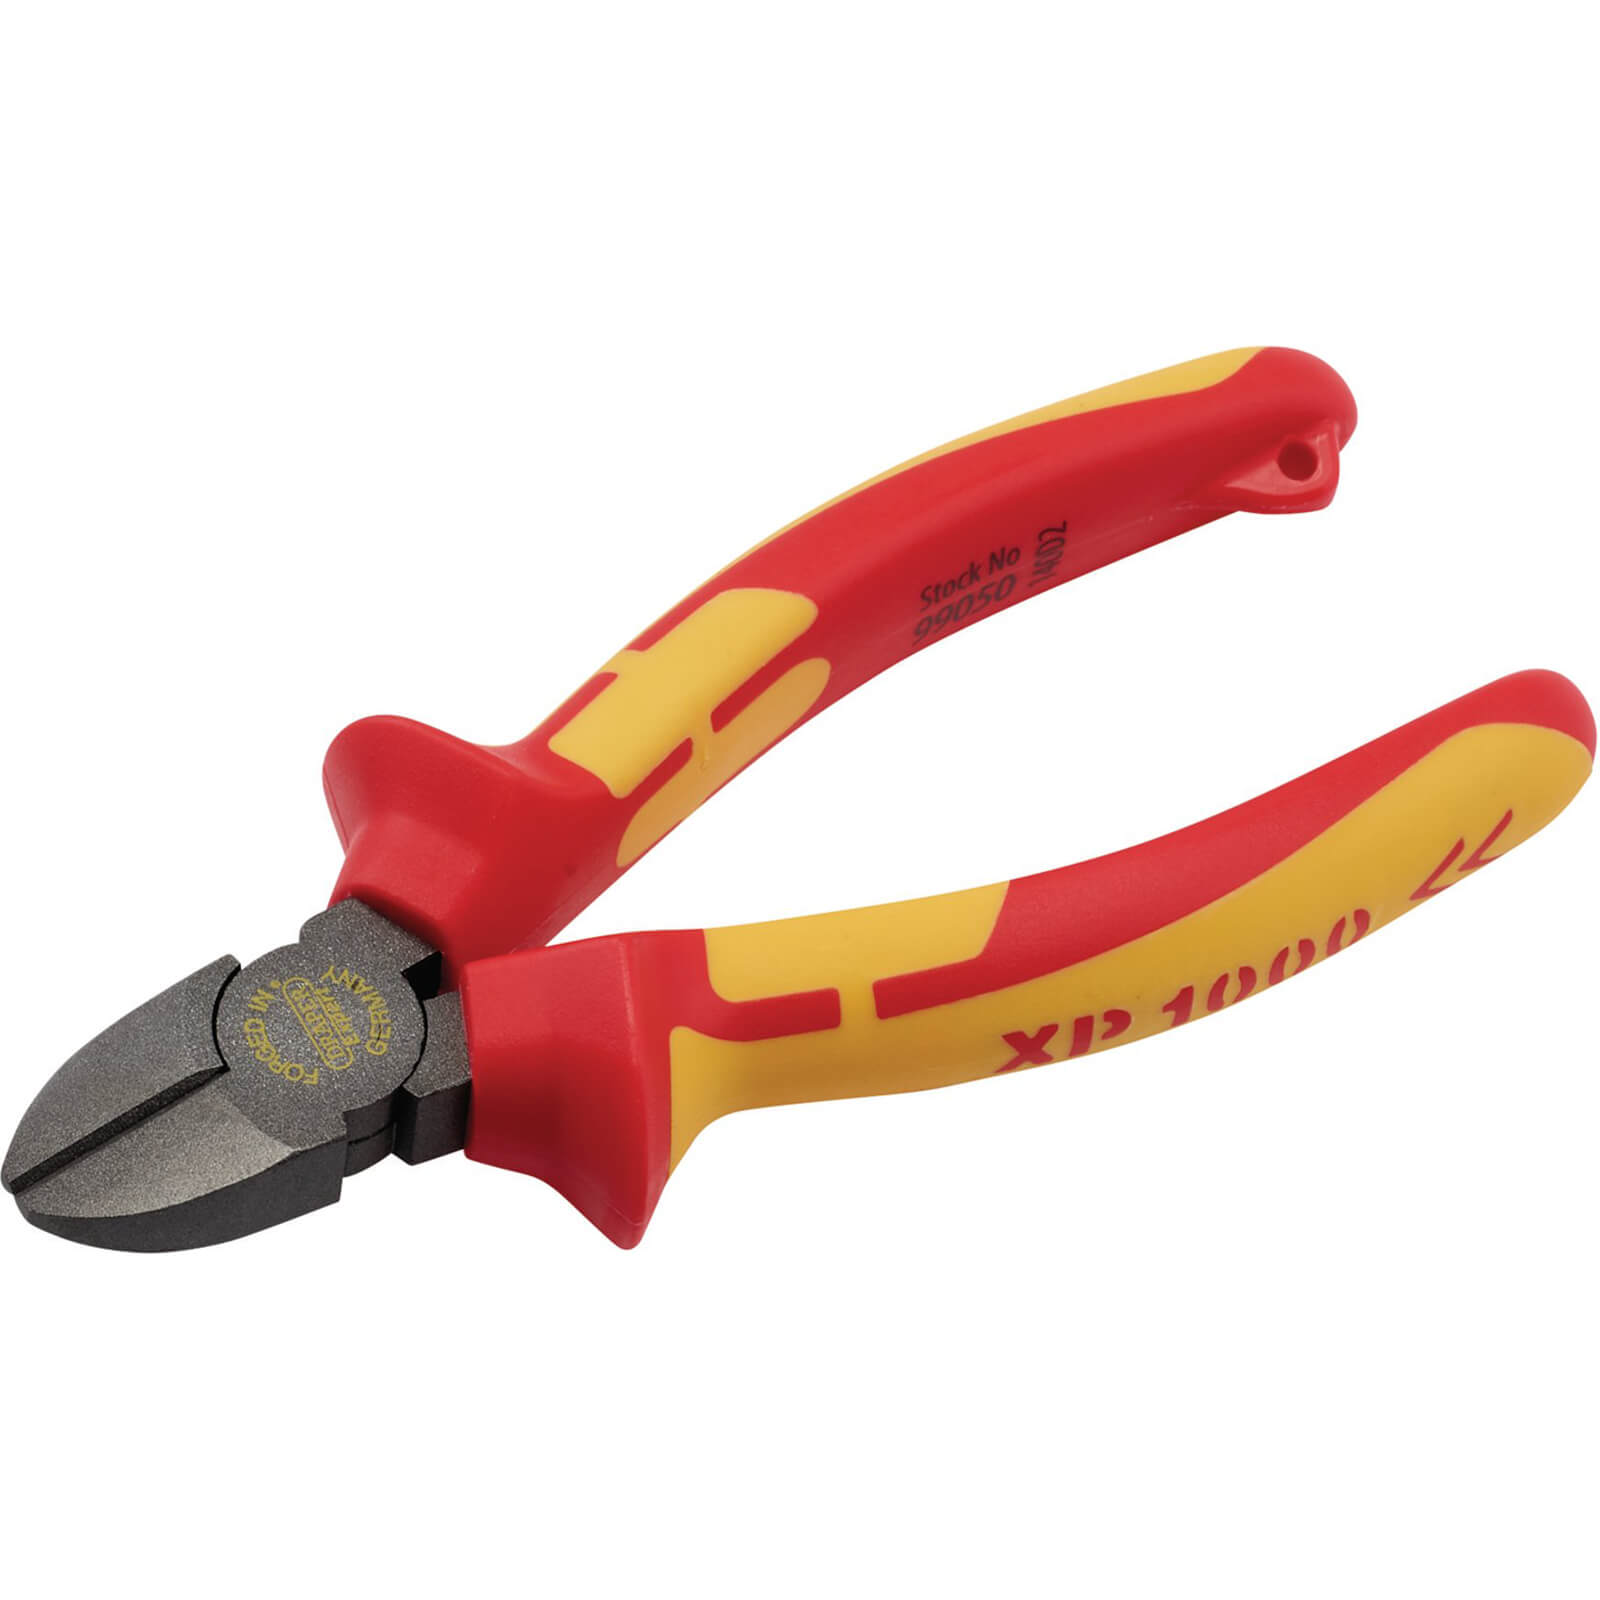 Photos - Utility Knife Draper XP1000 VDE Tethered Diagonal Side Cutters 140mm 99050 